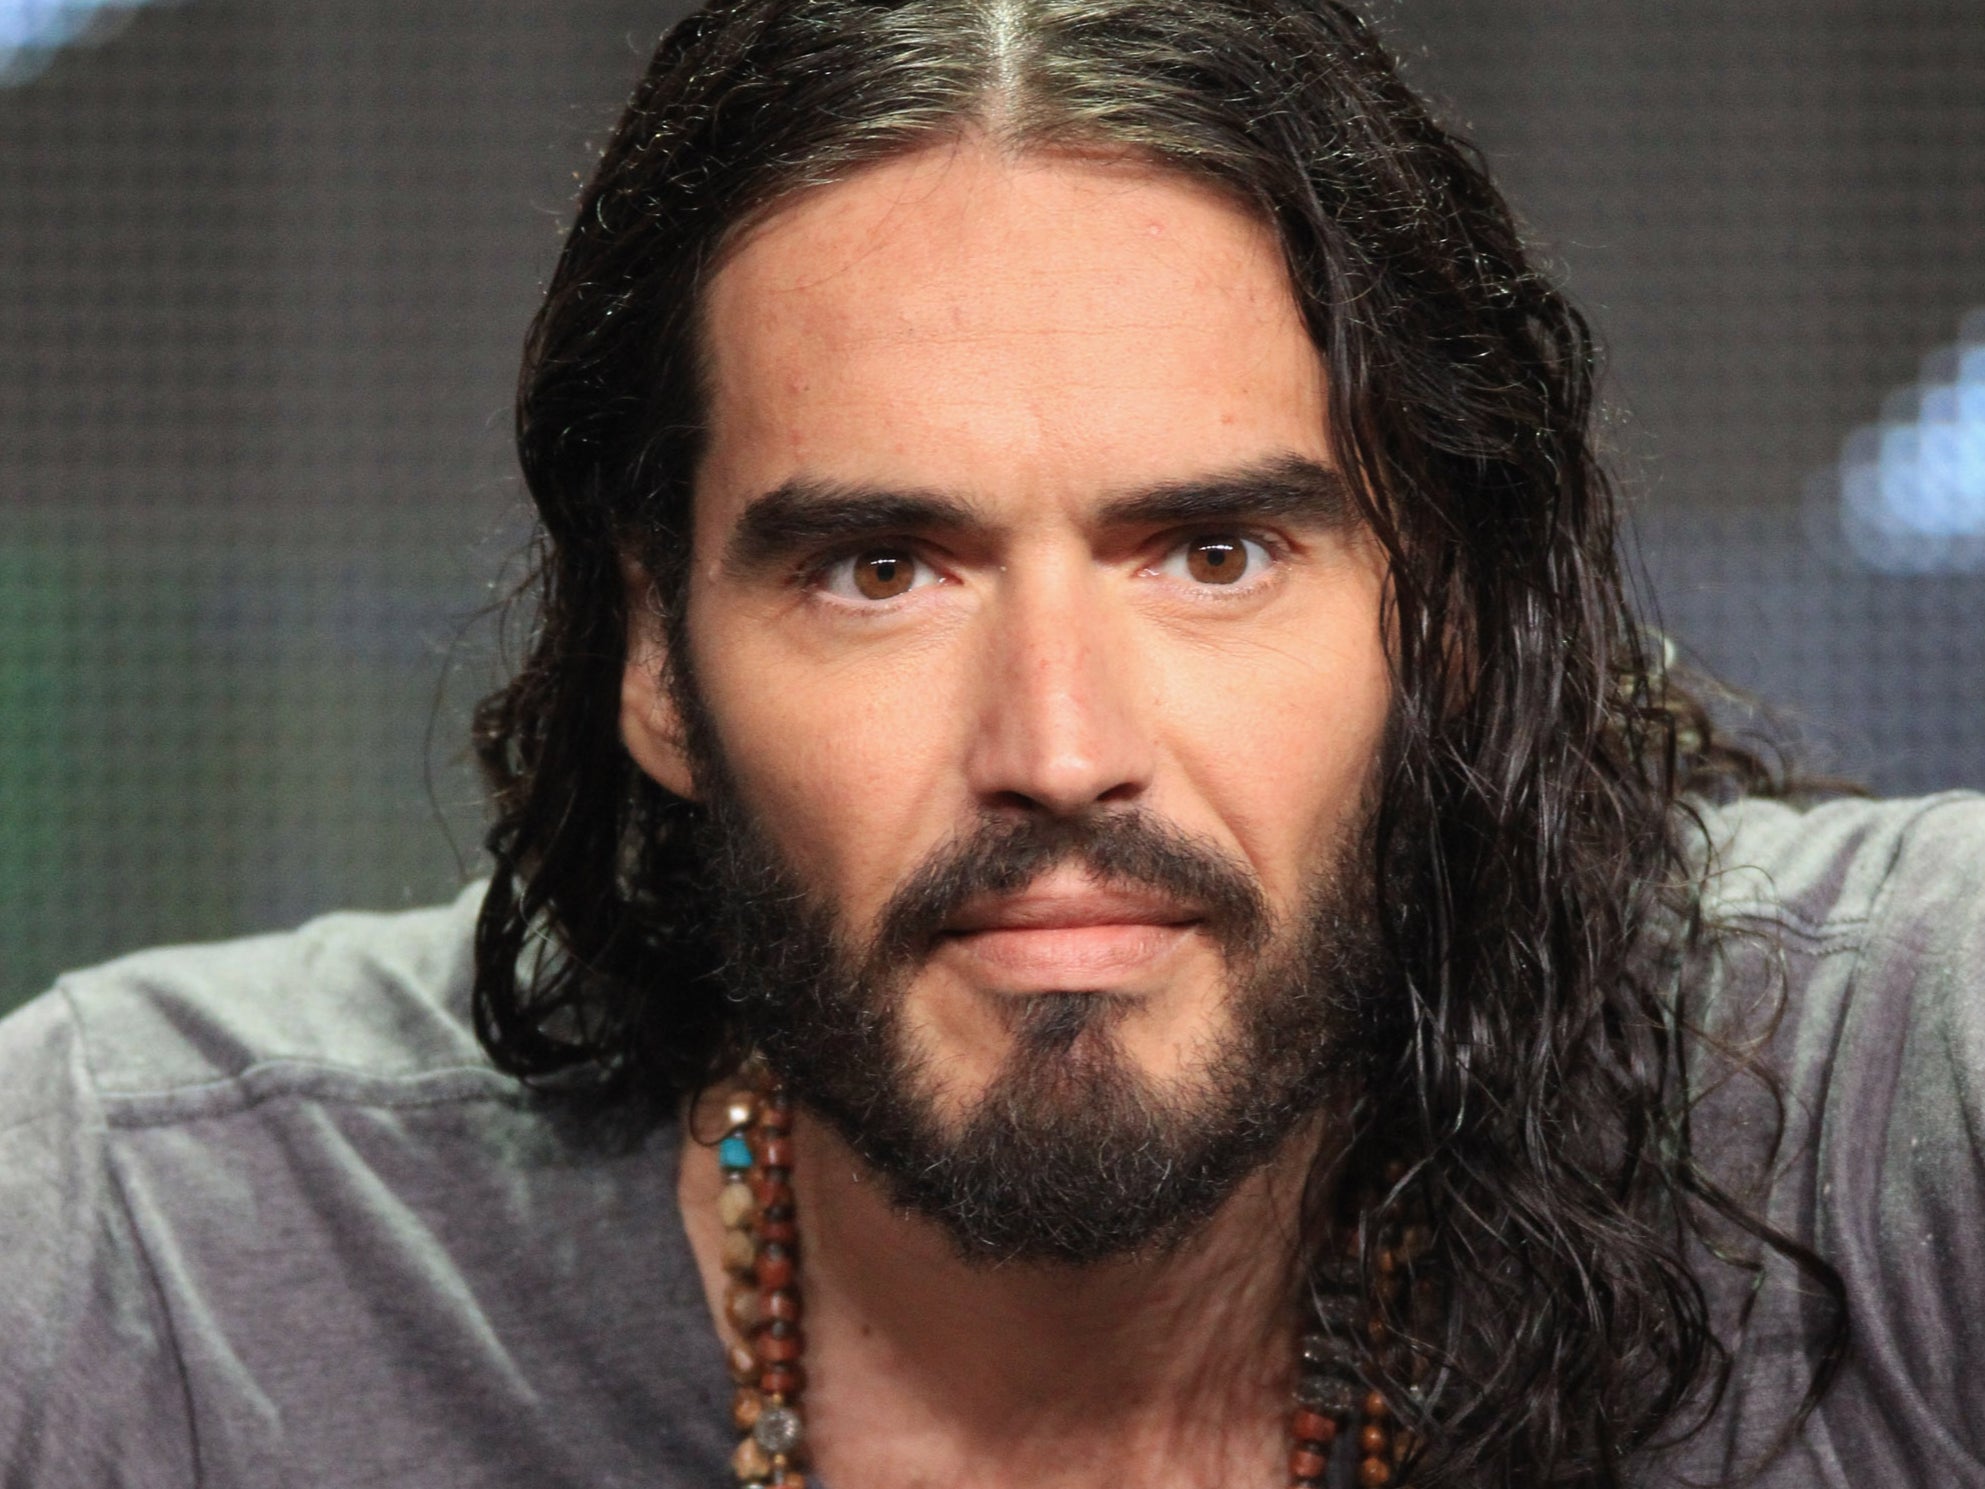 Russell Brand has been accused of sexual assaults and having a relationship with a 16 year-old when he was in his thirities